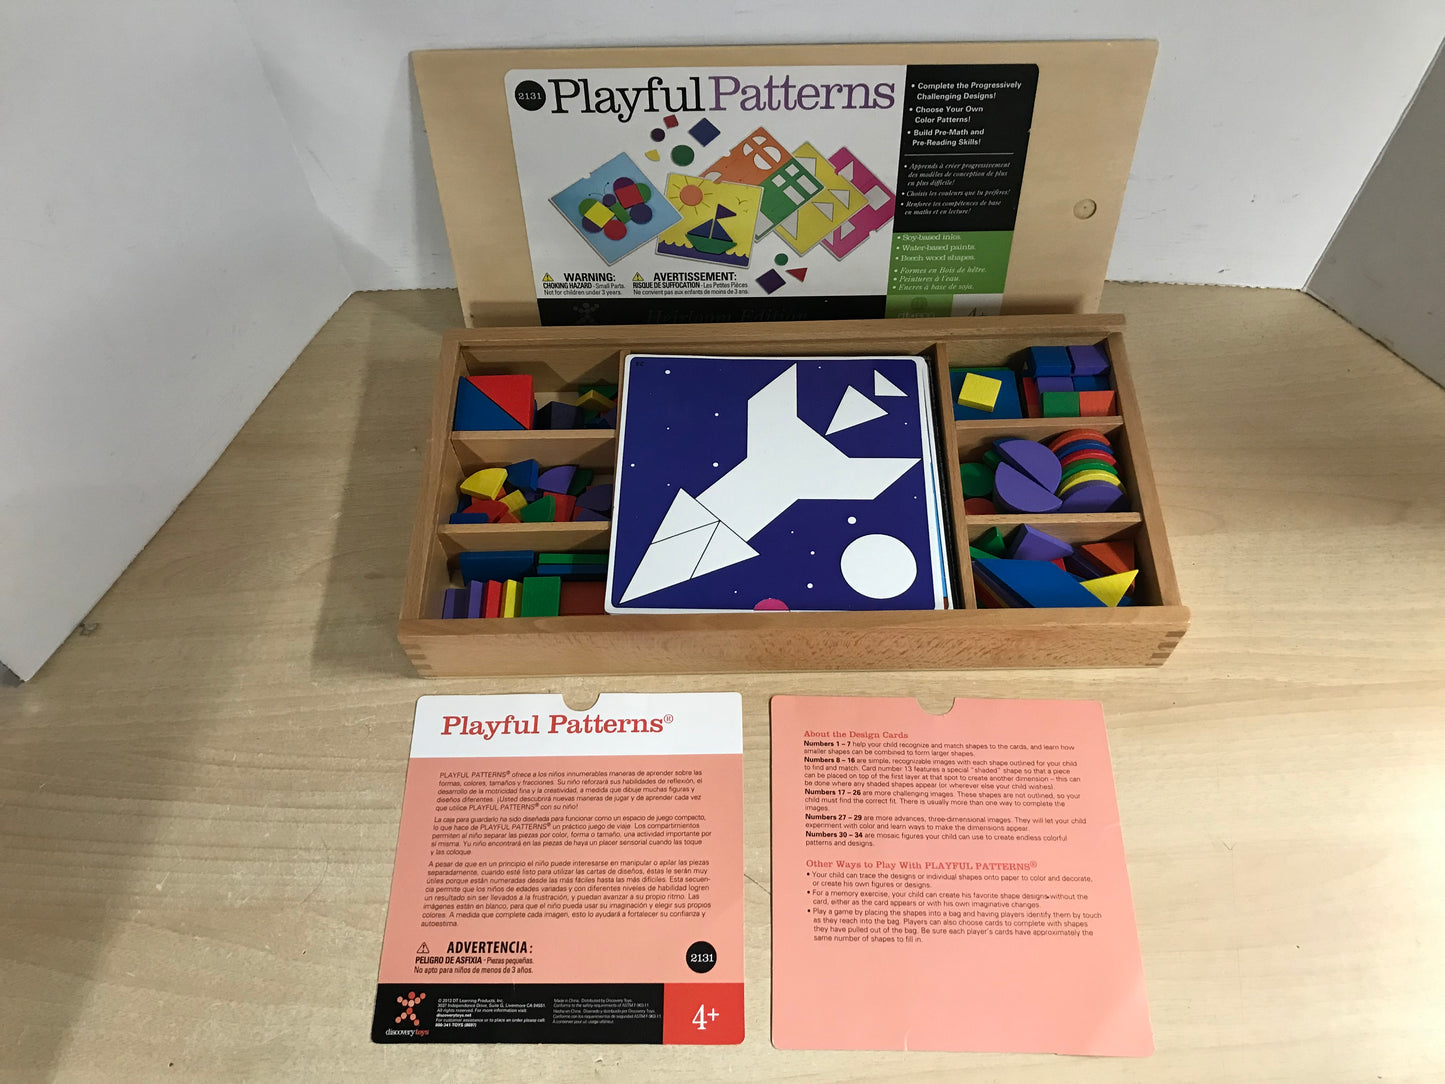 Y Game Child Playful Patterns Discovery Toys Heirloom Wood Edition Plastic coated Cards Eco Friendly Age 4+ Excellent